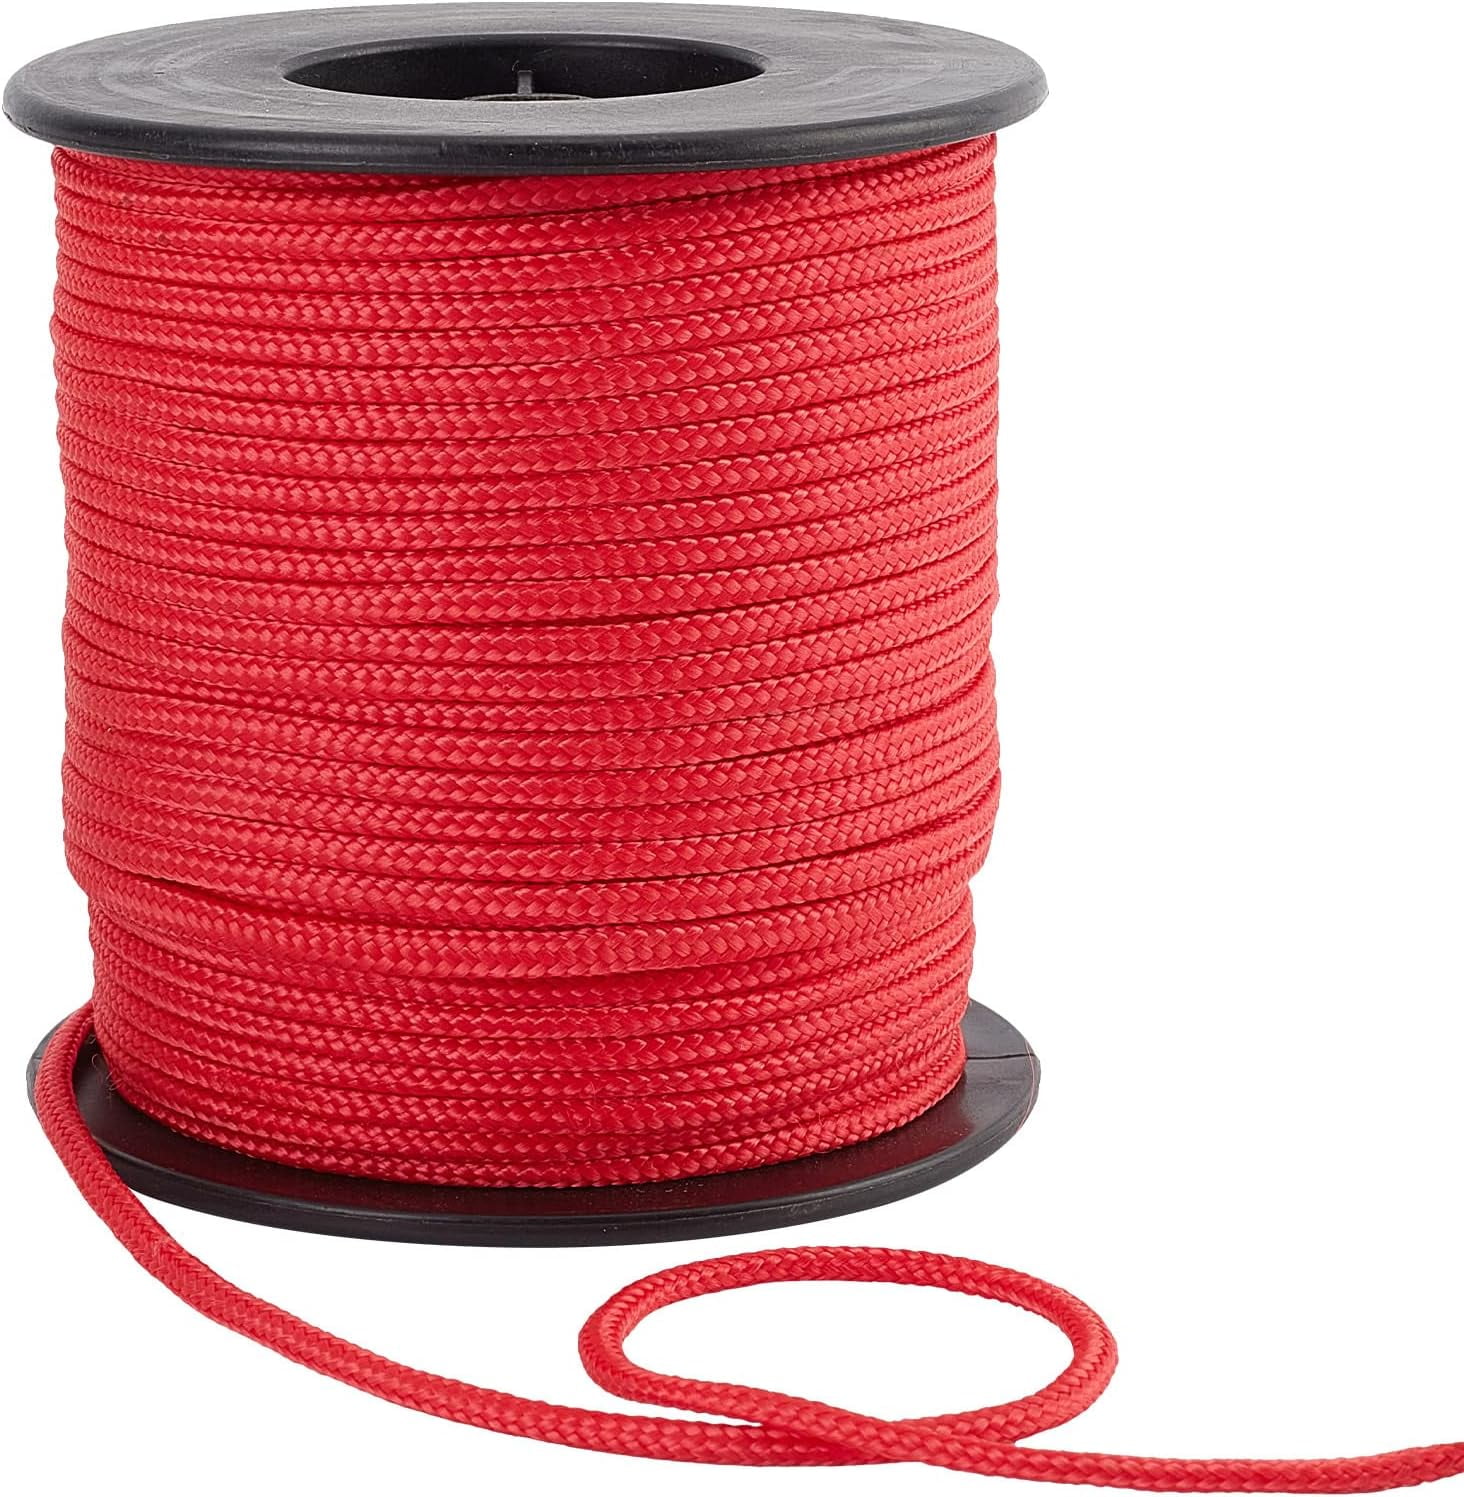 3mm 54yard Red Parachute Cord Nylon Rope Cord Braided Lift Shade Cord  Blinds String Wind Chime Cord Replacement 